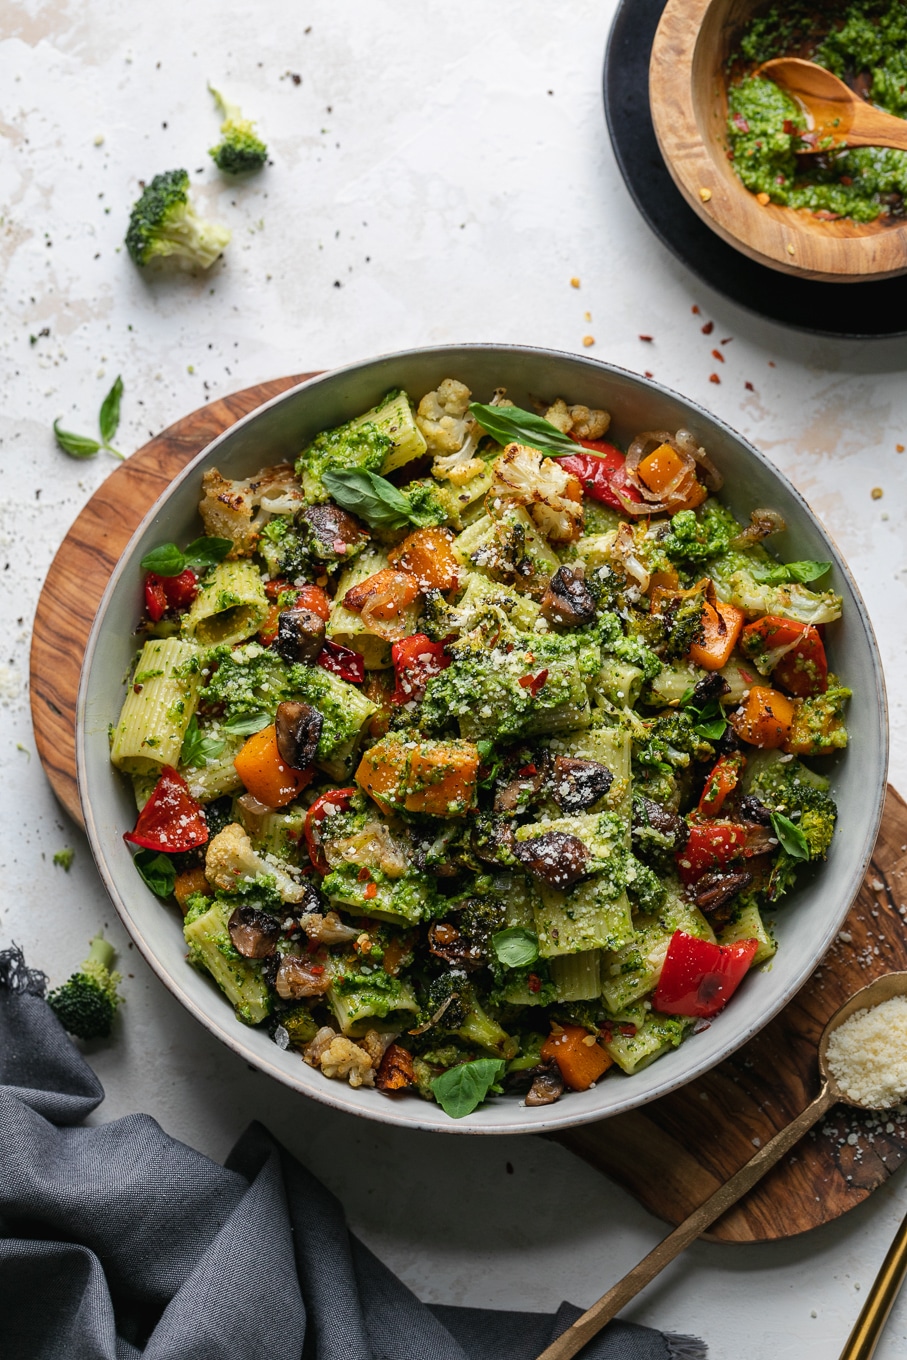 Broccoli Pesto Pasta with Roasted Vegetables